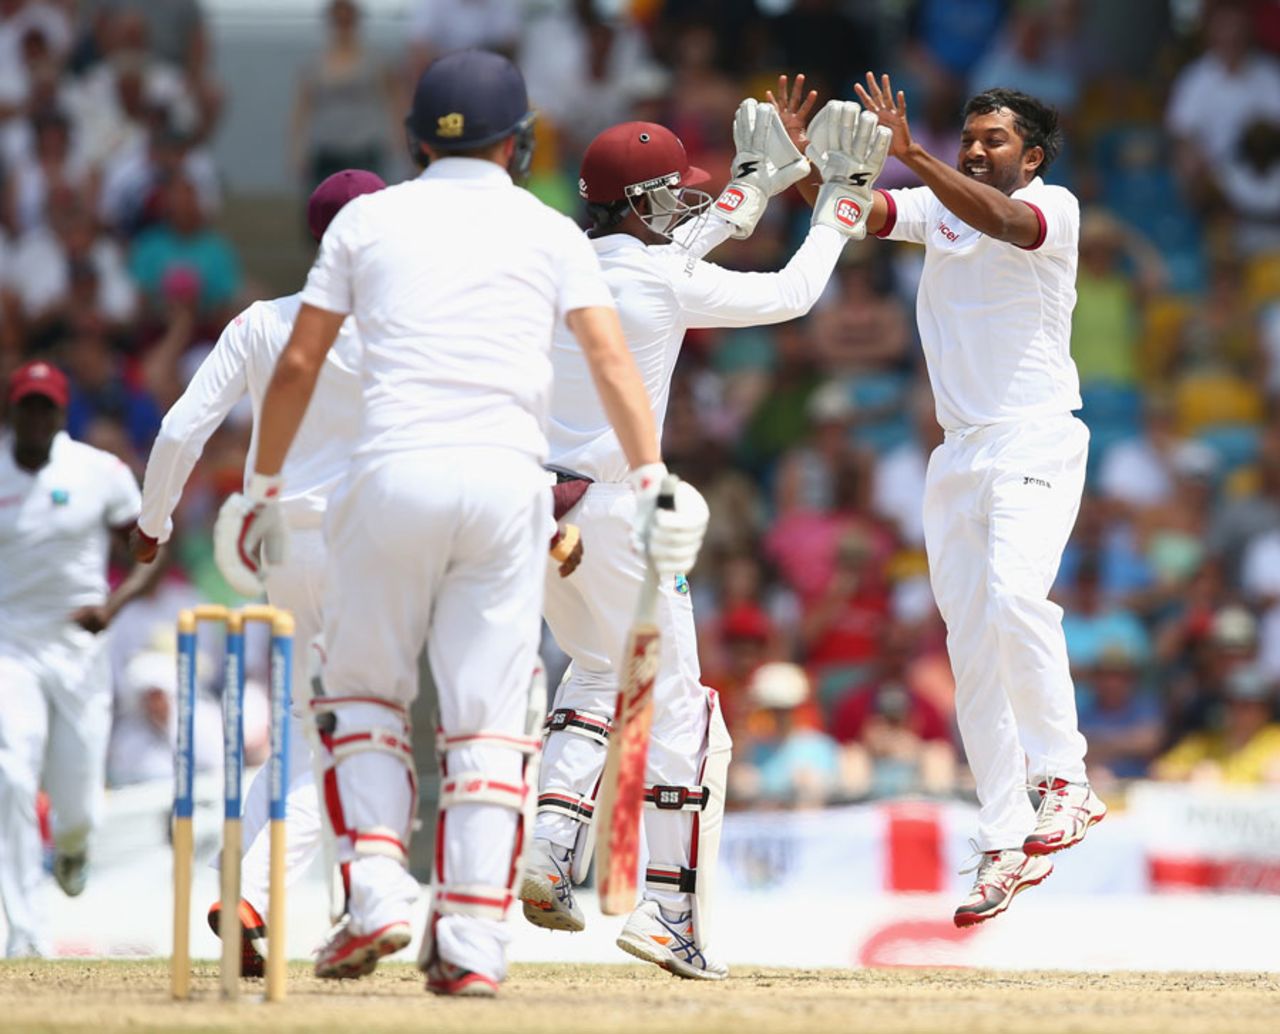 Veerasammy Permaul struck in his first over, West Indies v England, 3rd Test, Bridgetown, 3rd day, May 3, 2015